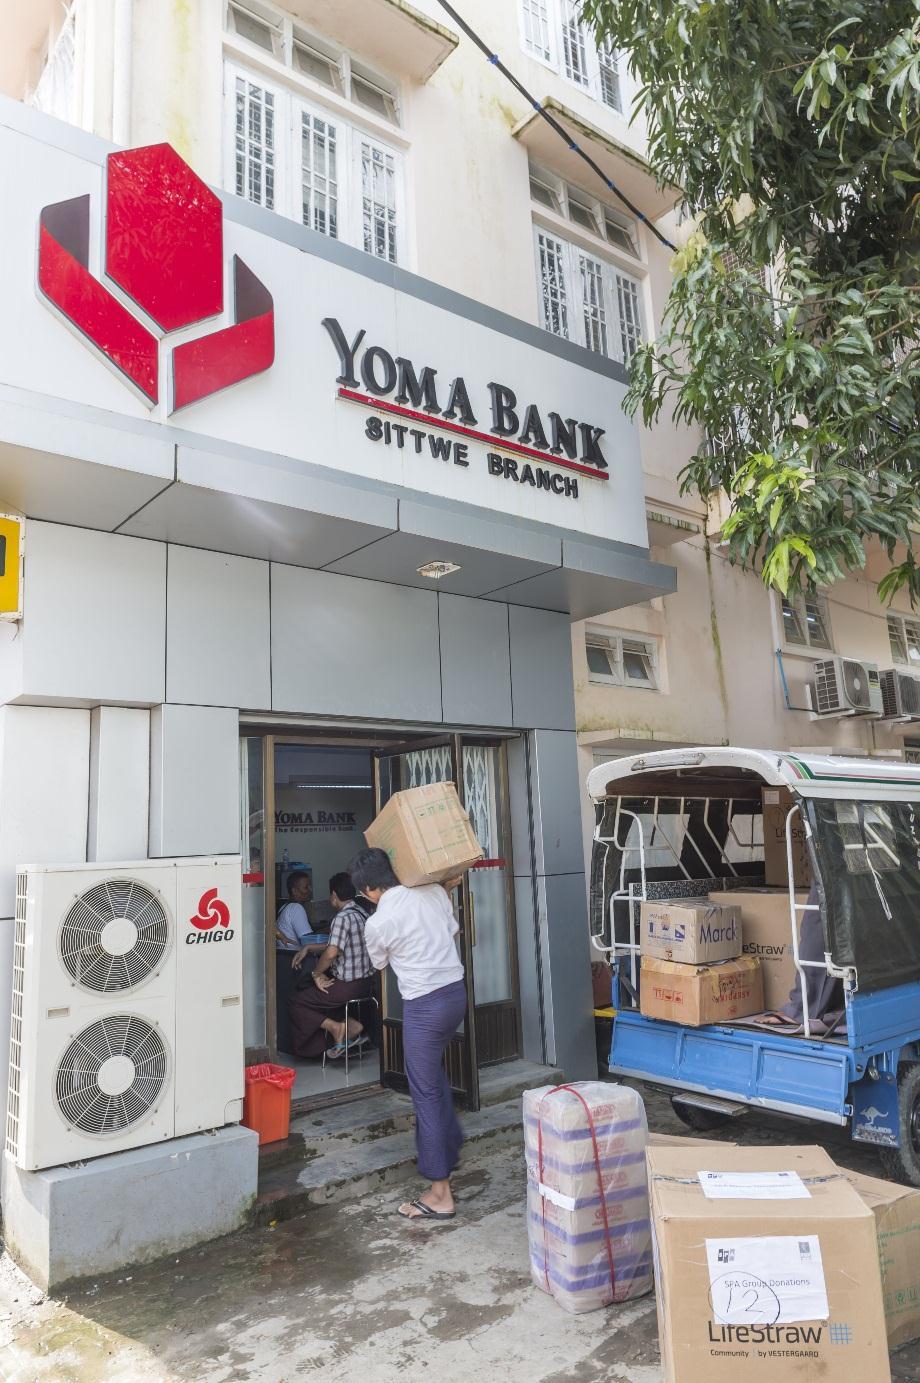 Staffs of Yoma Bank in